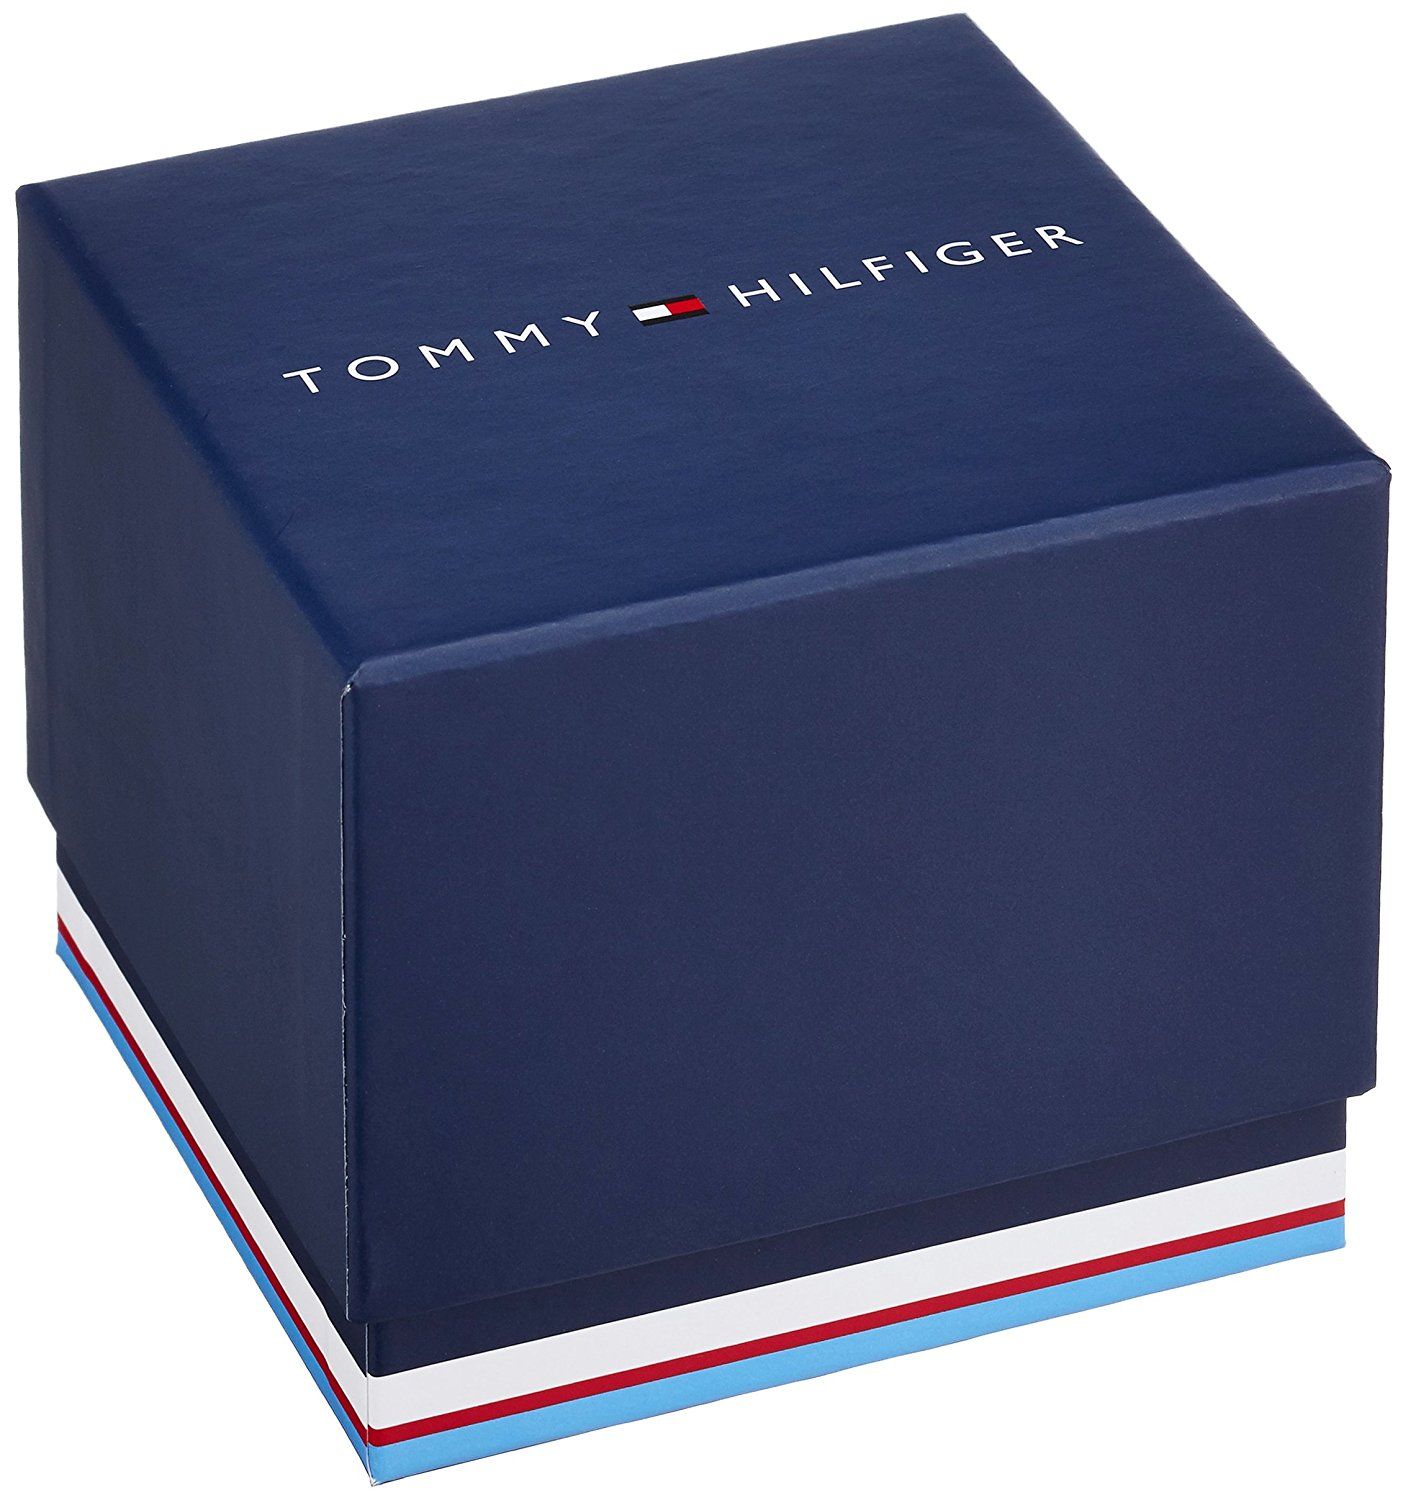 This Tommy Hilfiger Connor Multi Dial Watch for Men is the perfect timepiece to wear or to gift. It's Silver 44 mm Round case combined with the comfortable Silver Stainless steel watch band will ensure you enjoy this stunning timepiece without any compromise. Operated by a high quality Quartz movement and water resistant to 5 bars, your watch will keep ticking. The classic colours will go great with any outfit . It enables you to easily spice up a normal outfit and add style to your life. -The watch has a calendar function: Day-Date, 24-hour Display High quality 21 cm length and 23 mm width Silver Stainless steel strap with a Fold over with push button clasp Case diameter: 44 mm,case thickness: 10 mm, case colour: Silver and dial colour: Blue